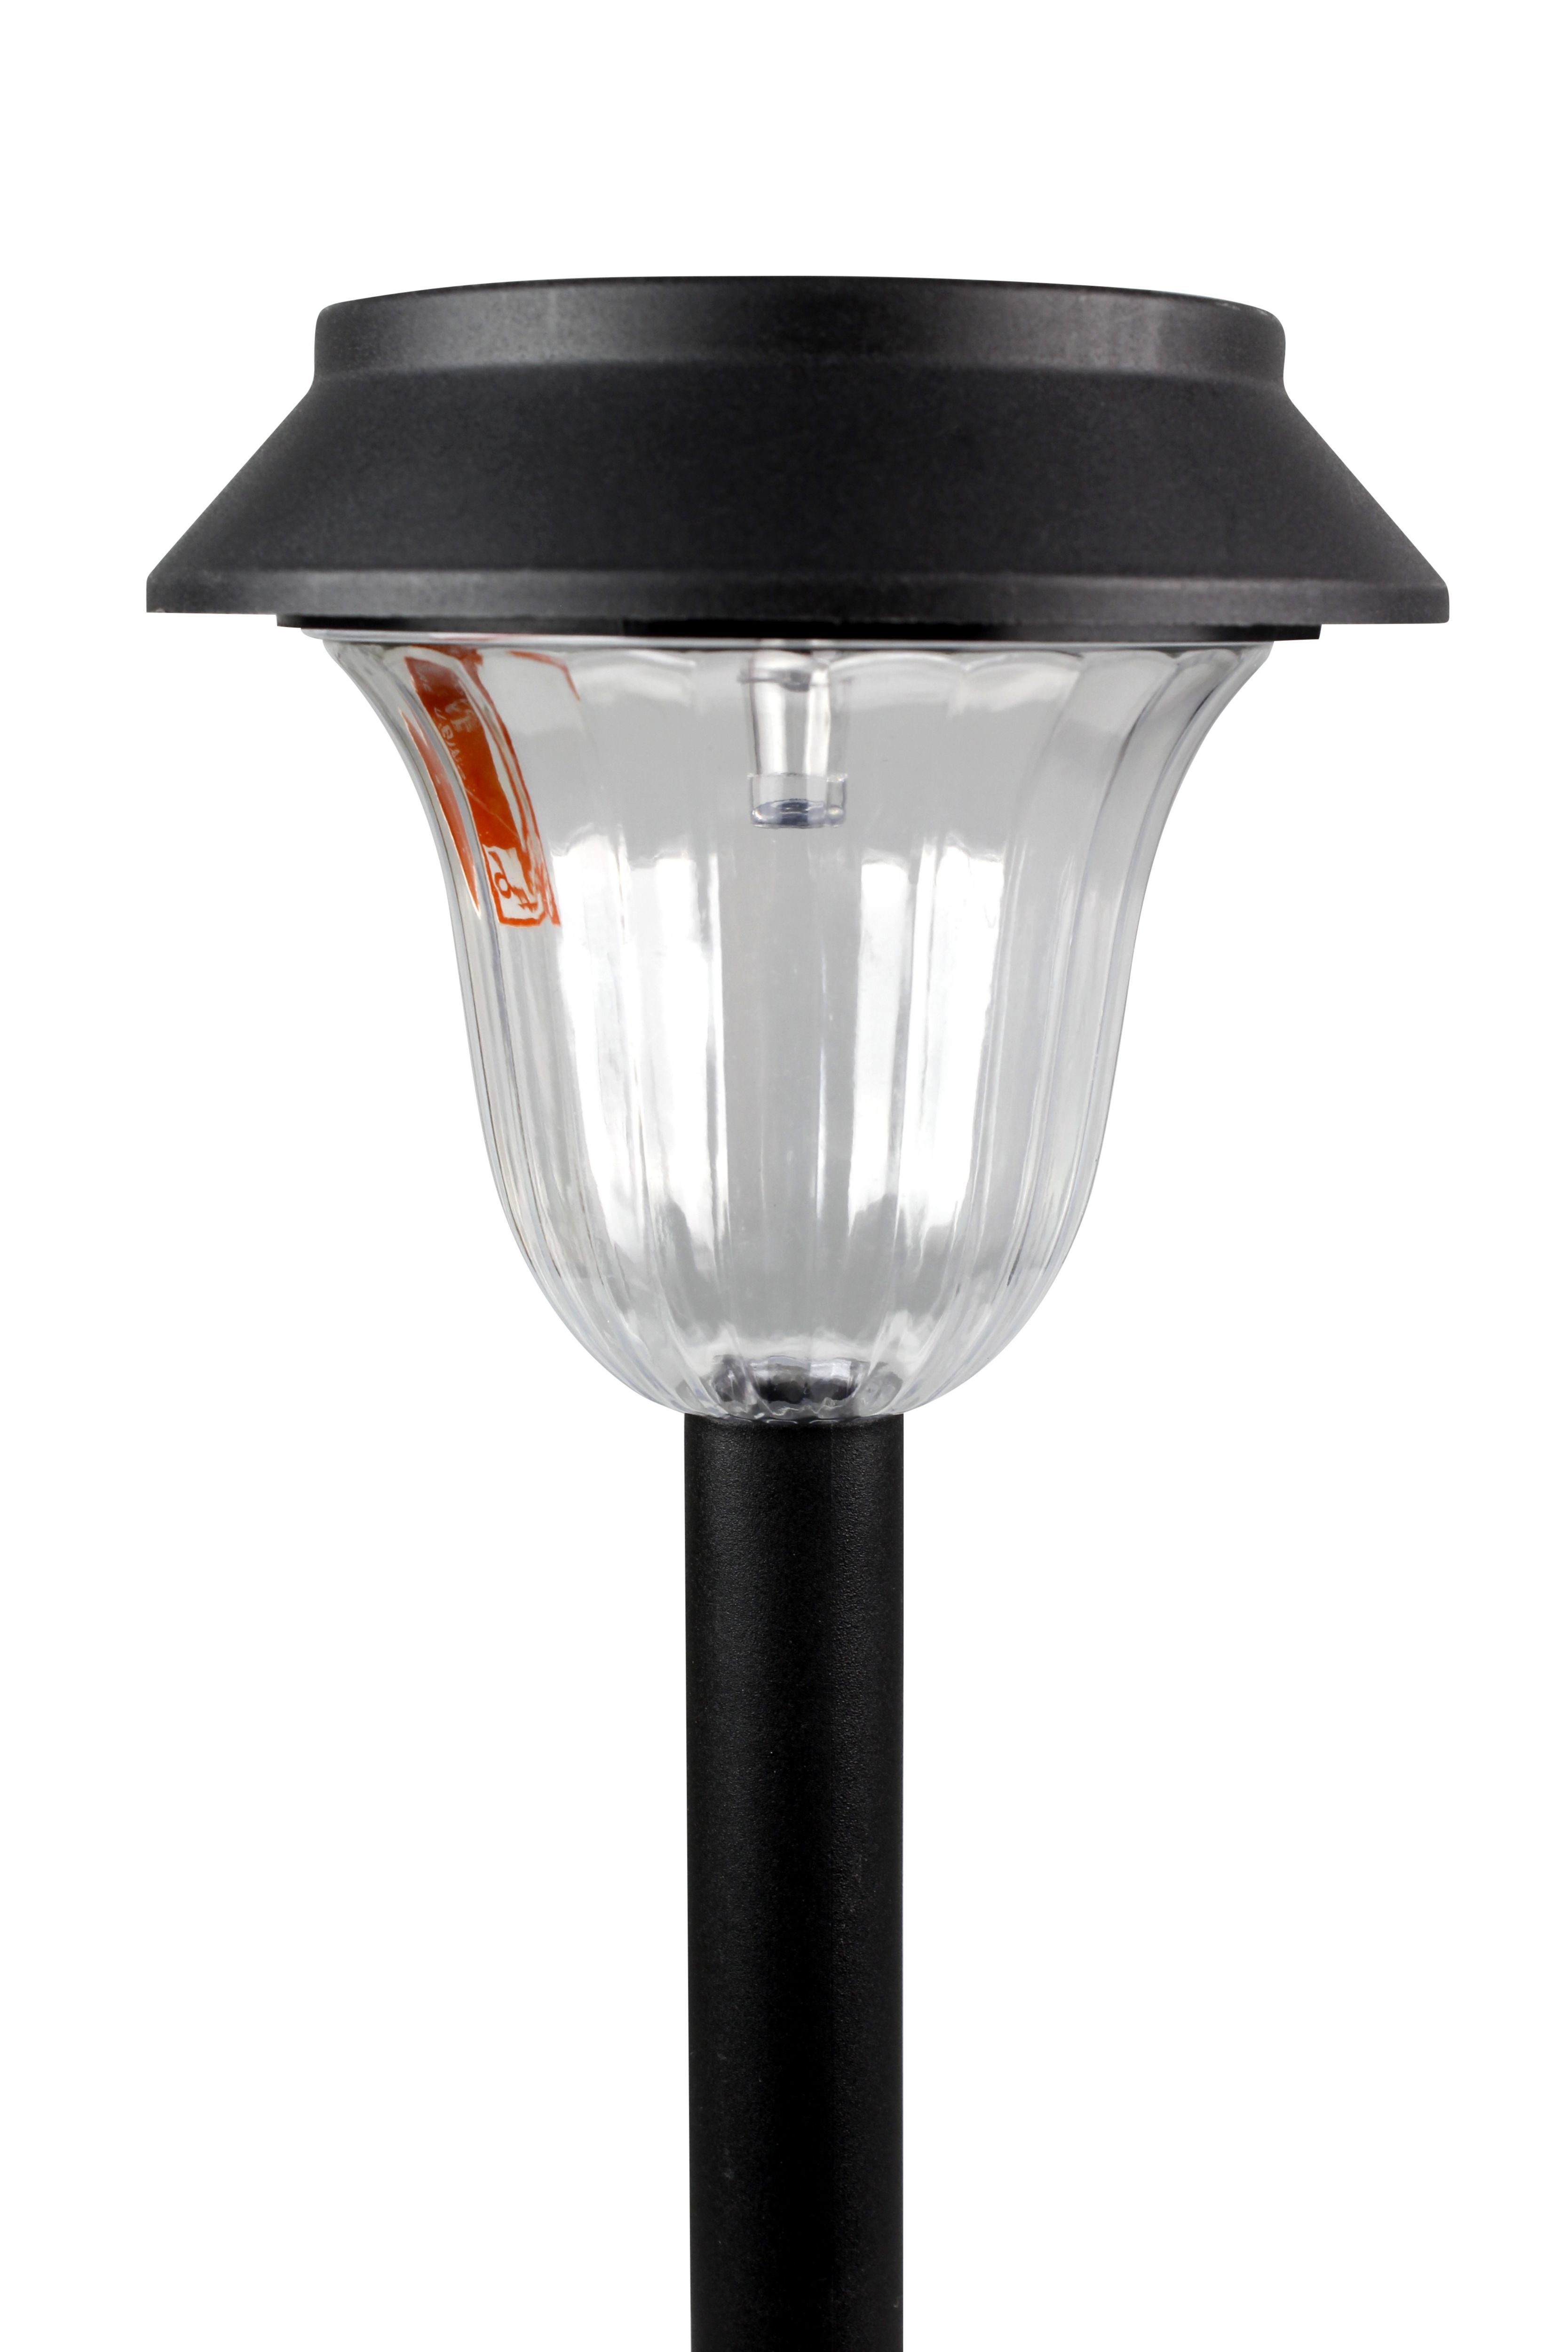 Black Round Solar-powered Integrated LED Outdoor Stake light